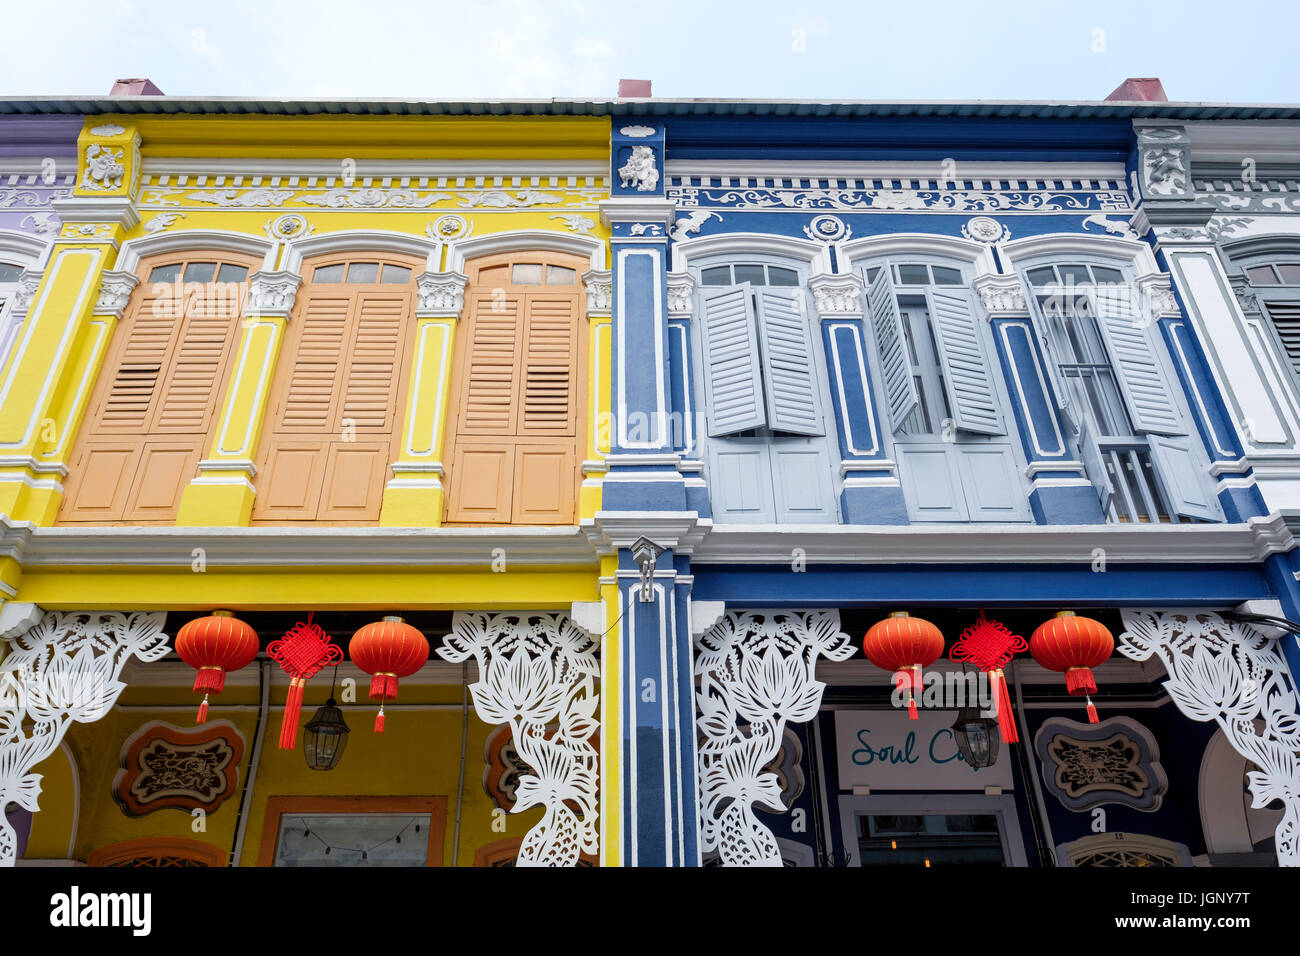 Renovated façades of mixed-style (colonial and Peranakan, or Straits Chinese) shophouses, George Town, Pulau Pinang, Malaysia. Stock Photo